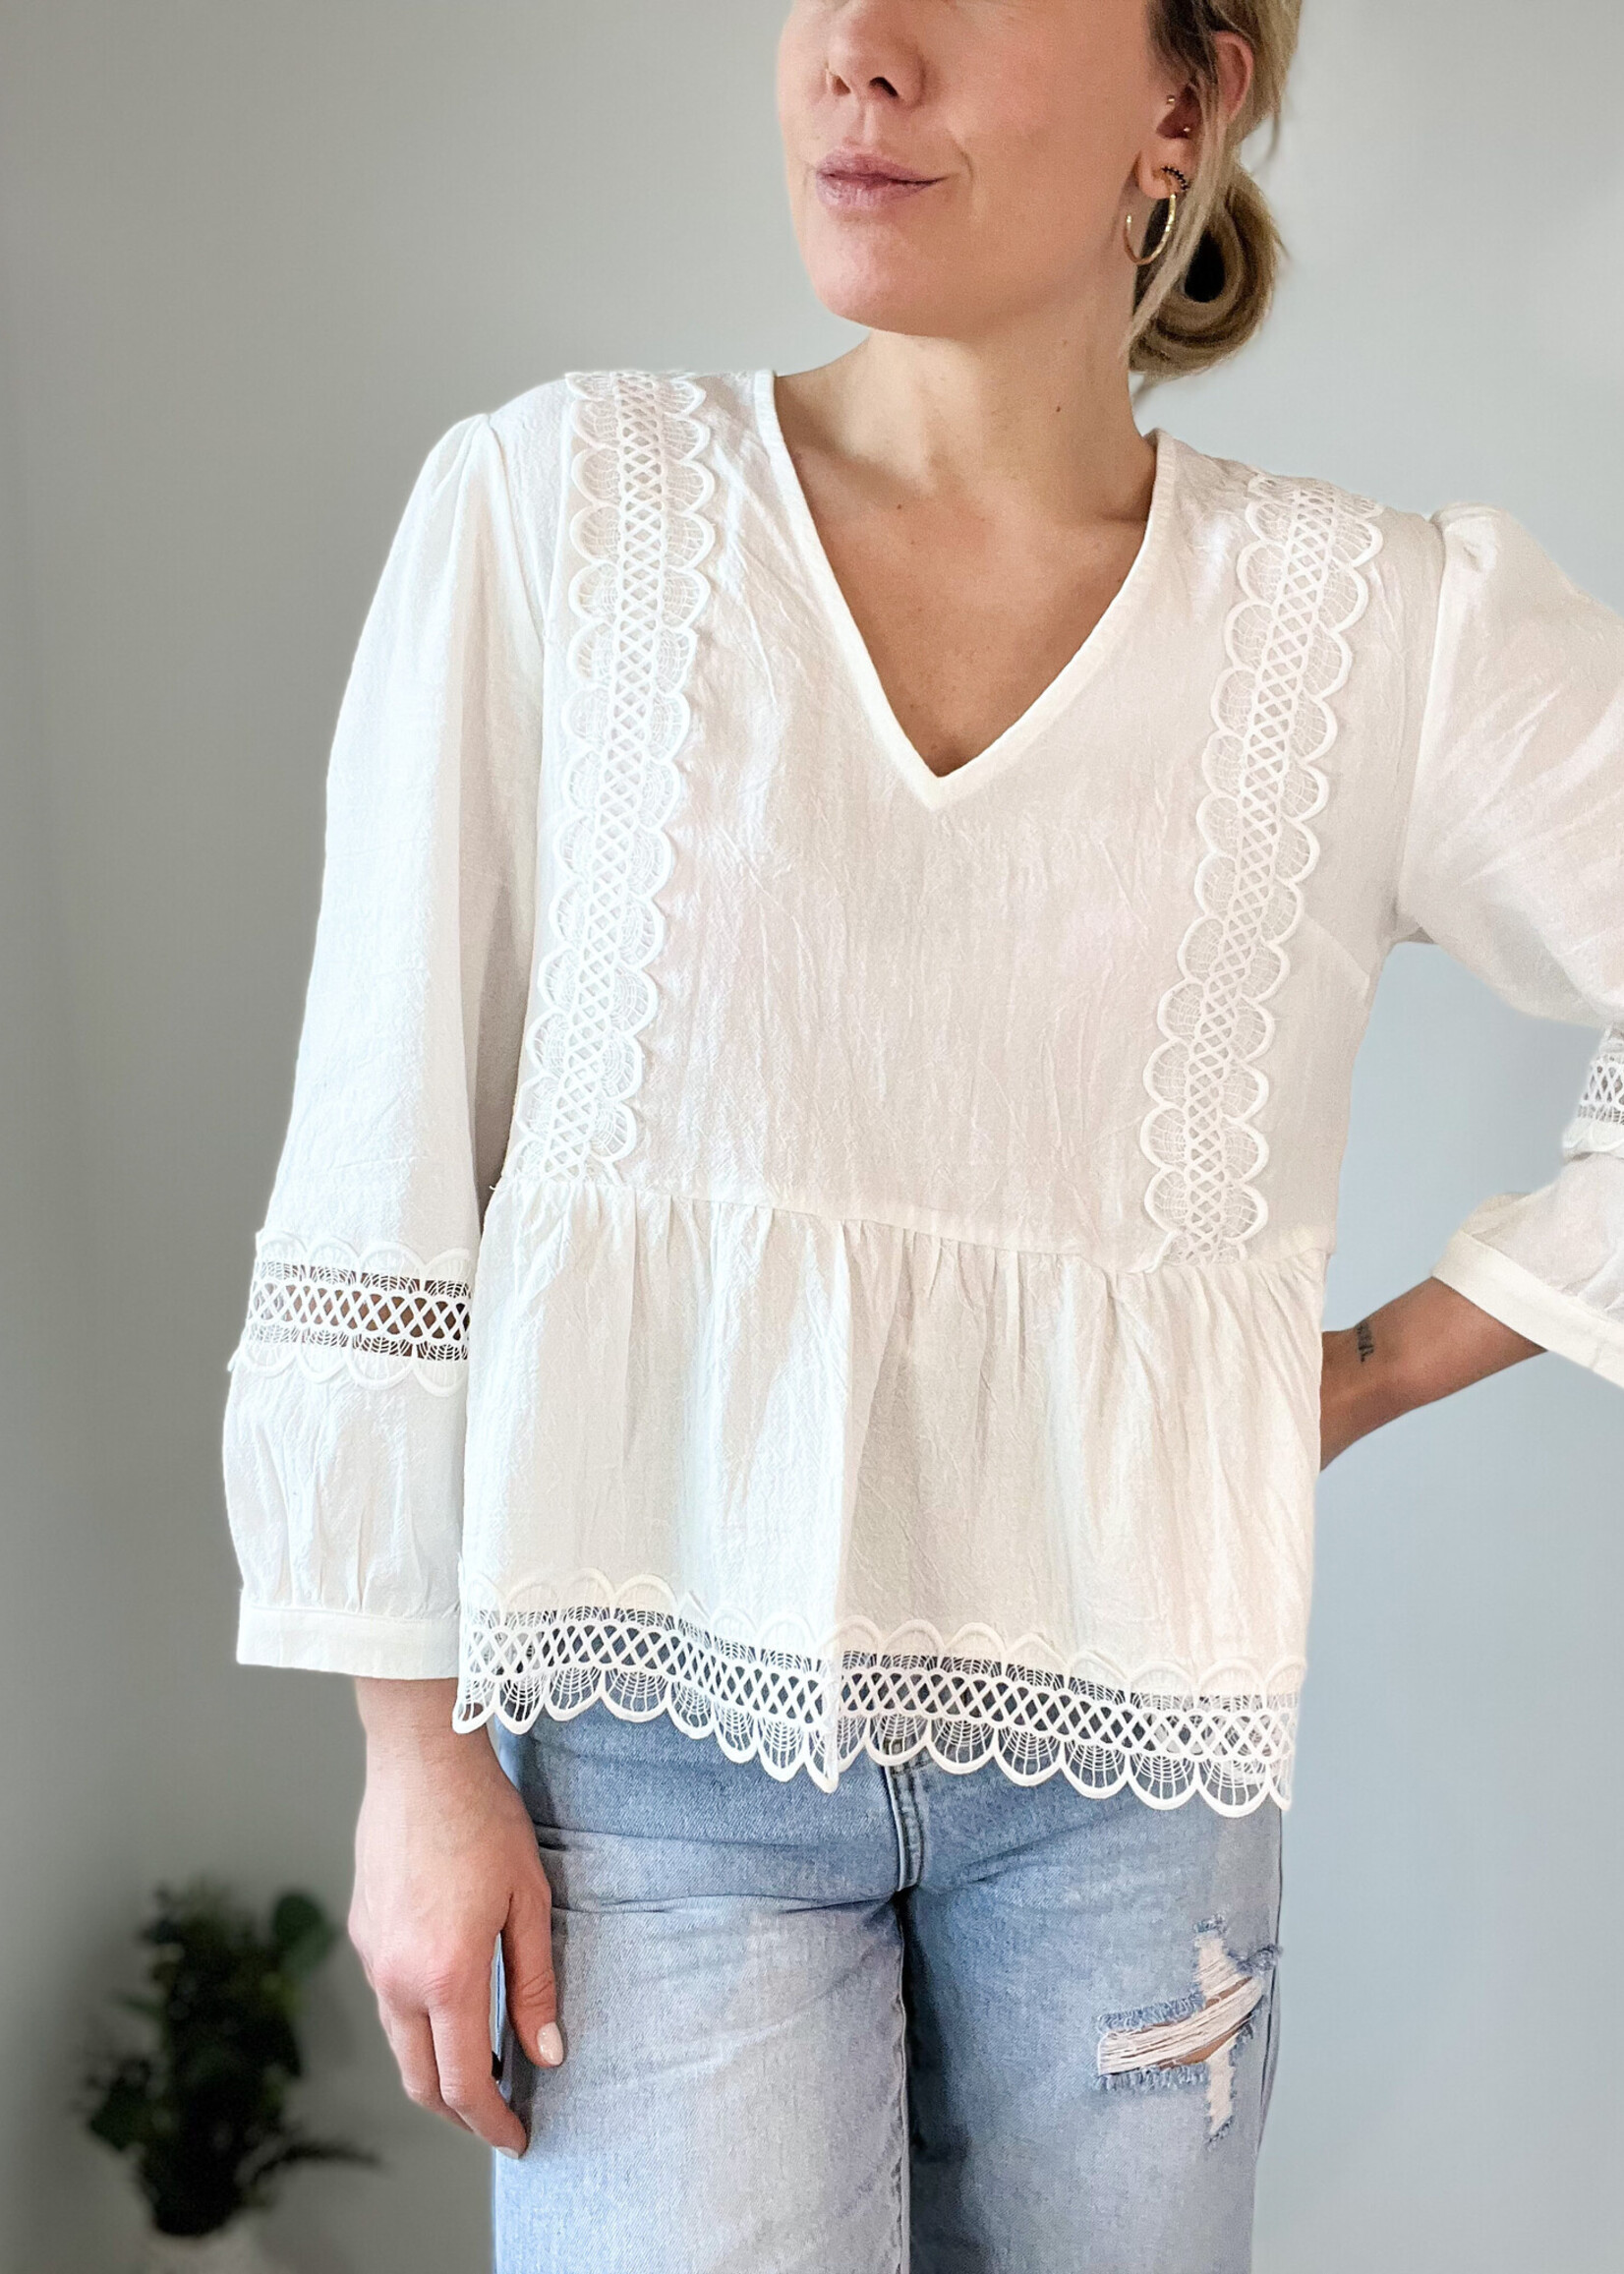 ROMANTIC TOUCH OF LACE BLOUSE